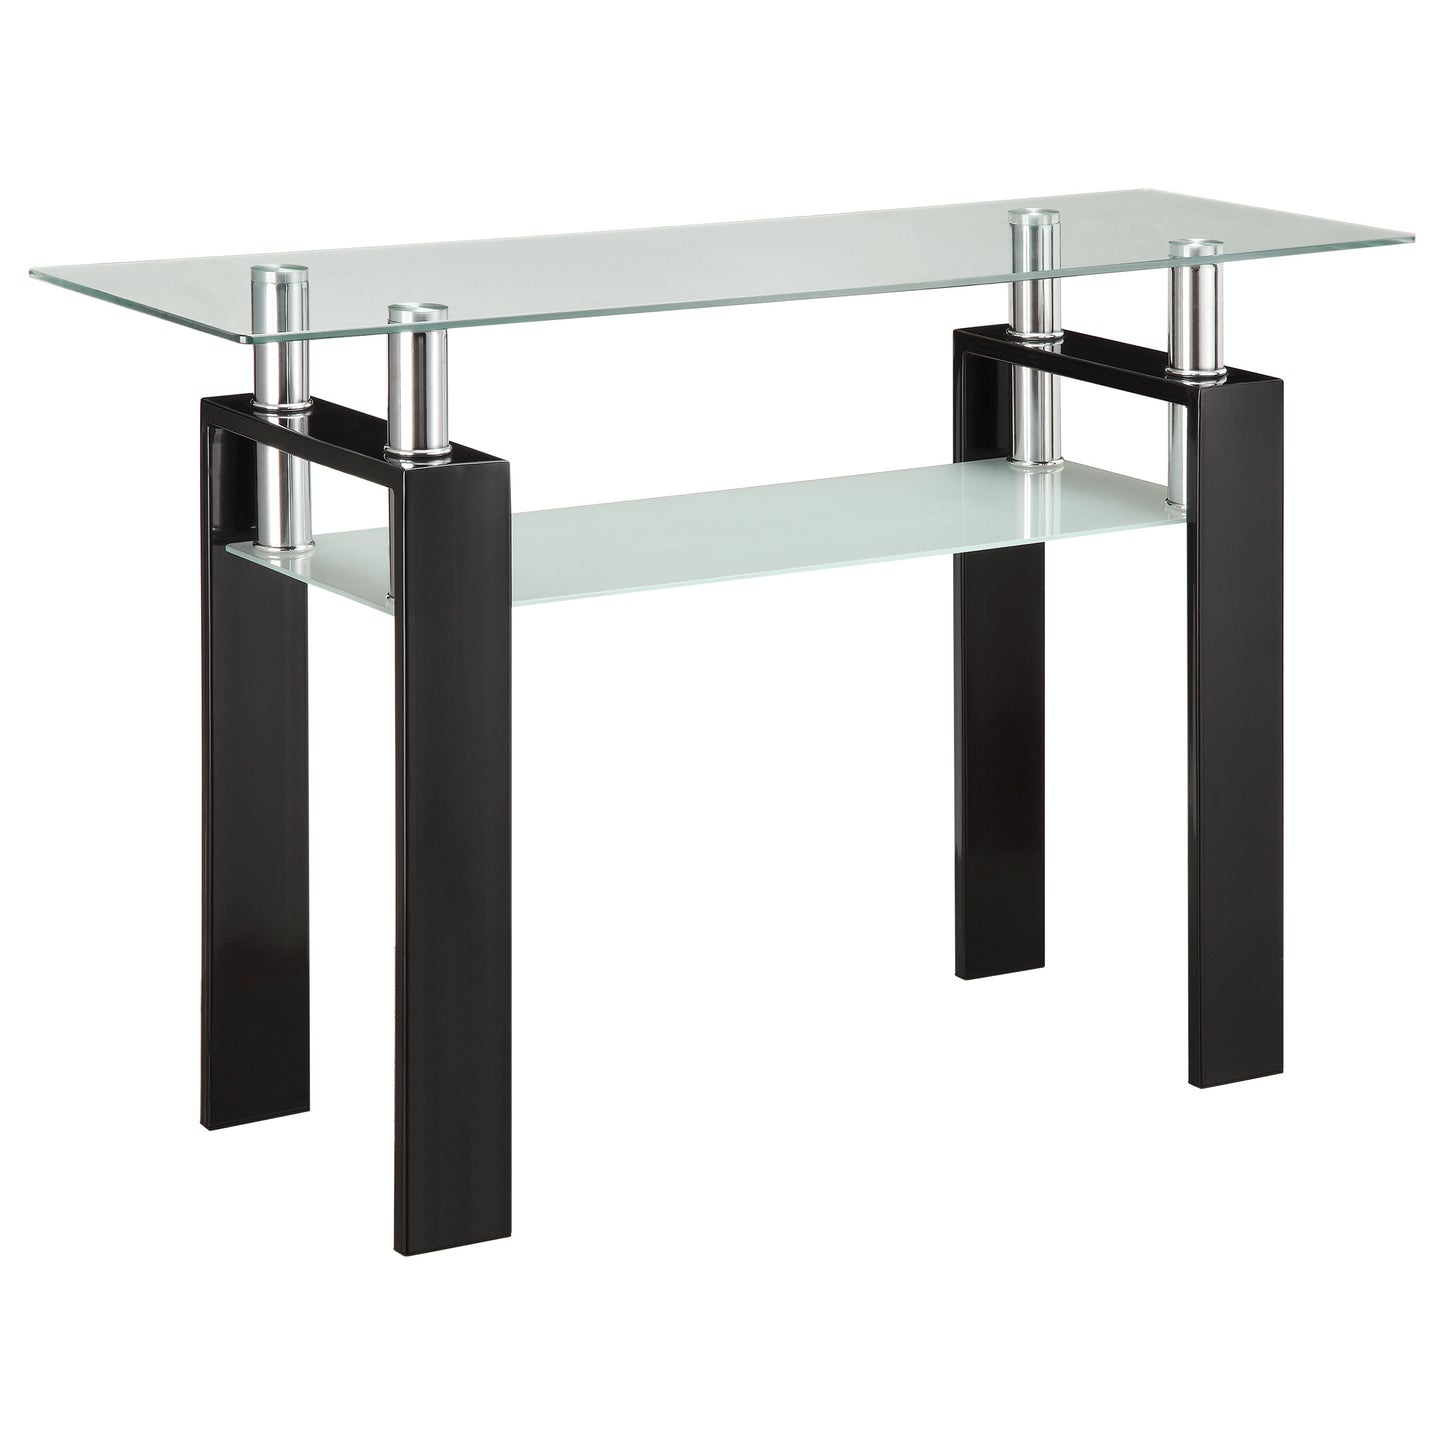 Dyer Tempered Glass Sofa Table with Shelf Black